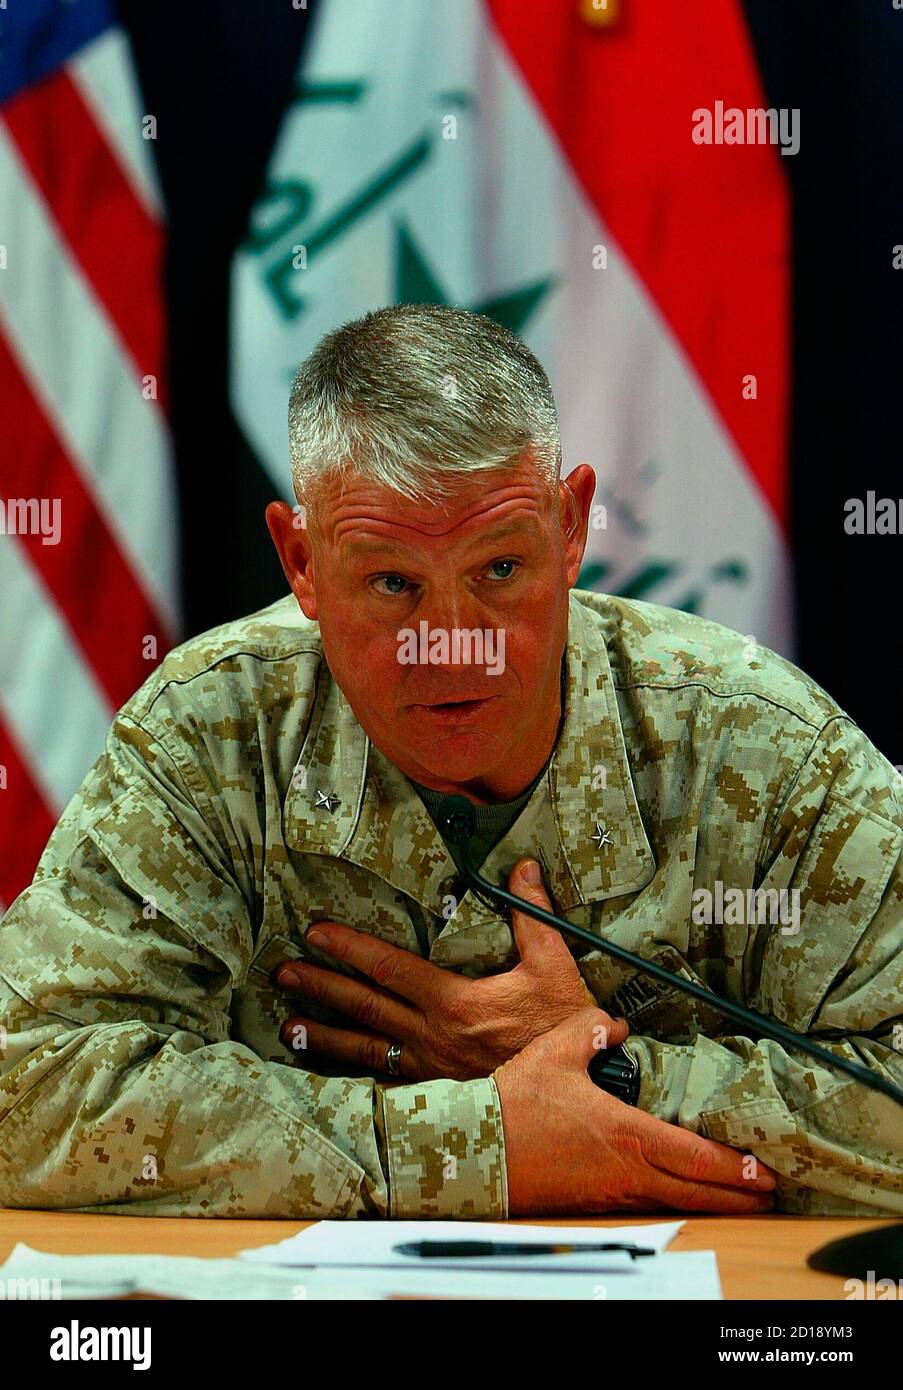 Brigadier General Mark Gurganus, Ground Combat Element commander for the Multinational Force-West, speaks to the media during a news conference with Rear Admiral Mark I. Fox, deputy spokesman for the Multinational Force-Iraq (not pictured), at the heavily fortified Green Zone area in Baghdad September 30, 2007. REUTERS/Wathiq Khuzaie/Pool (IRAQ) Stock Photo